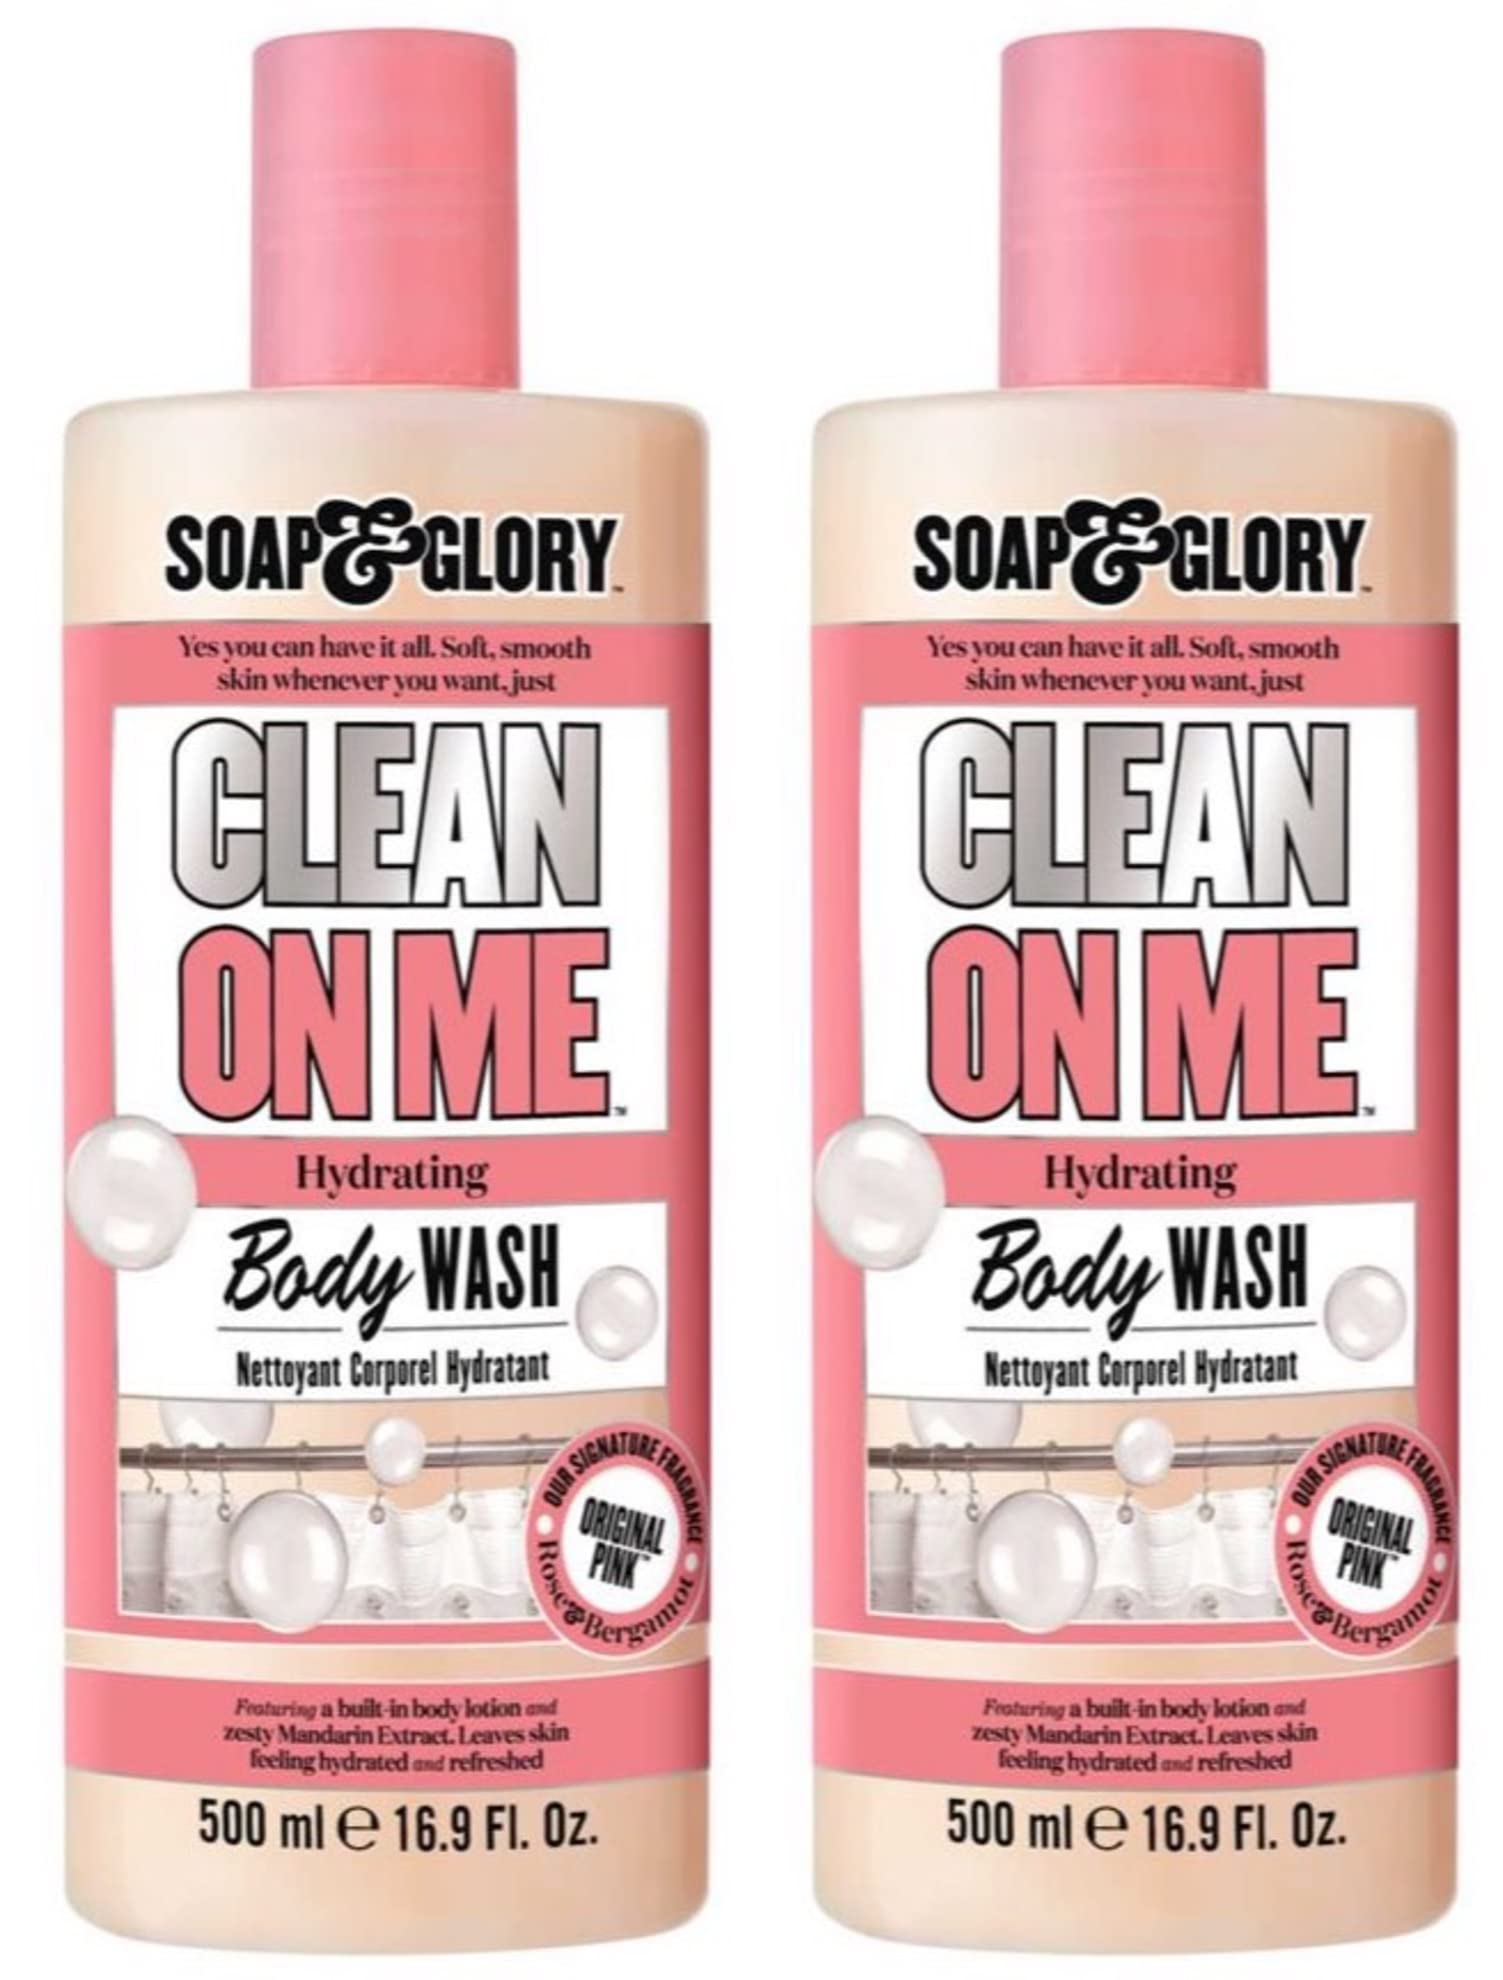 (2 PACK) Soap & Glory Clean On Me Creamy Clarifying Shower Gel x 500ml